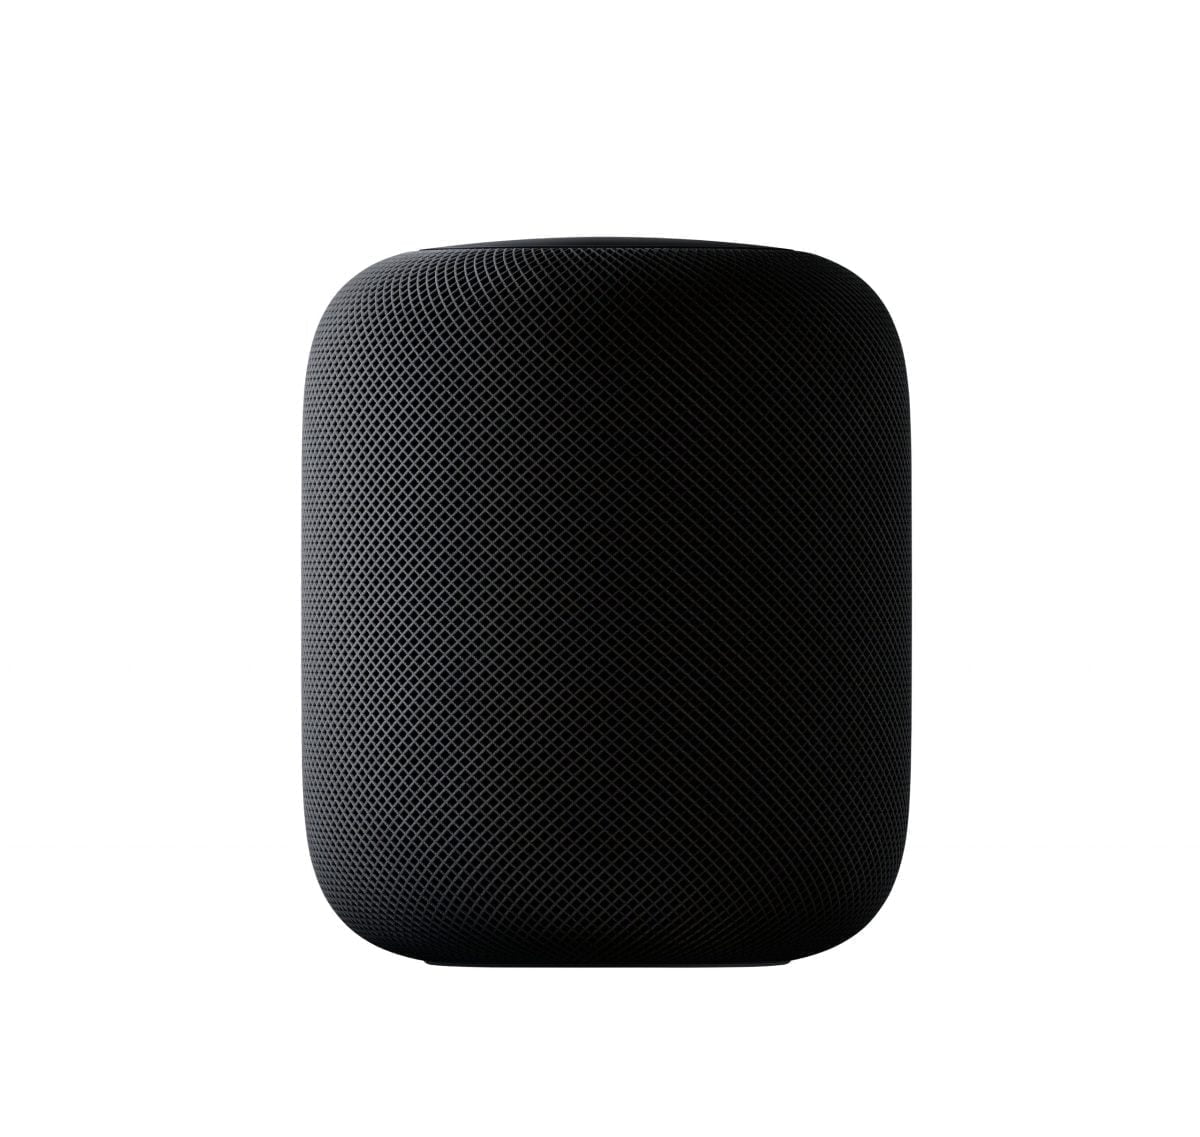 5902410 Sd Scaled Apple &Amp;Lt;P Class=&Amp;Quot;Hero-Intro Typography-Intro-Elevated Transition-2&Amp;Quot;&Amp;Gt;Homepod Is A Breakthrough Speaker That Adapts To Its Location And Delivers High-Fidelity Audio Wherever It’s Playing. Together With Apple Music And Siri, It Creates An Entirely New Way For You To Discover And Interact With Music At Home. And It Can Help You And Your Whole Family With Everyday Tasks — And Control Your Smart Home — All With Just Your Voice.&Amp;Lt;/P&Amp;Gt; &Amp;Lt;Strong&Amp;Gt;One Year International Apple Warranty&Amp;Lt;/Strong&Amp;Gt; Requires Iphone Se, Iphone 6S Or Later, Or Ipod Touch (7Th Generation) With The Latest Ios; Or Ipad Pro, Ipad (5Th Generation Or Later), Ipad Air 2 Or Later, Or Ipad Mini 4 Or Later With The Latest Ipados. Apple Homepod Smart Speaker - Space Gray